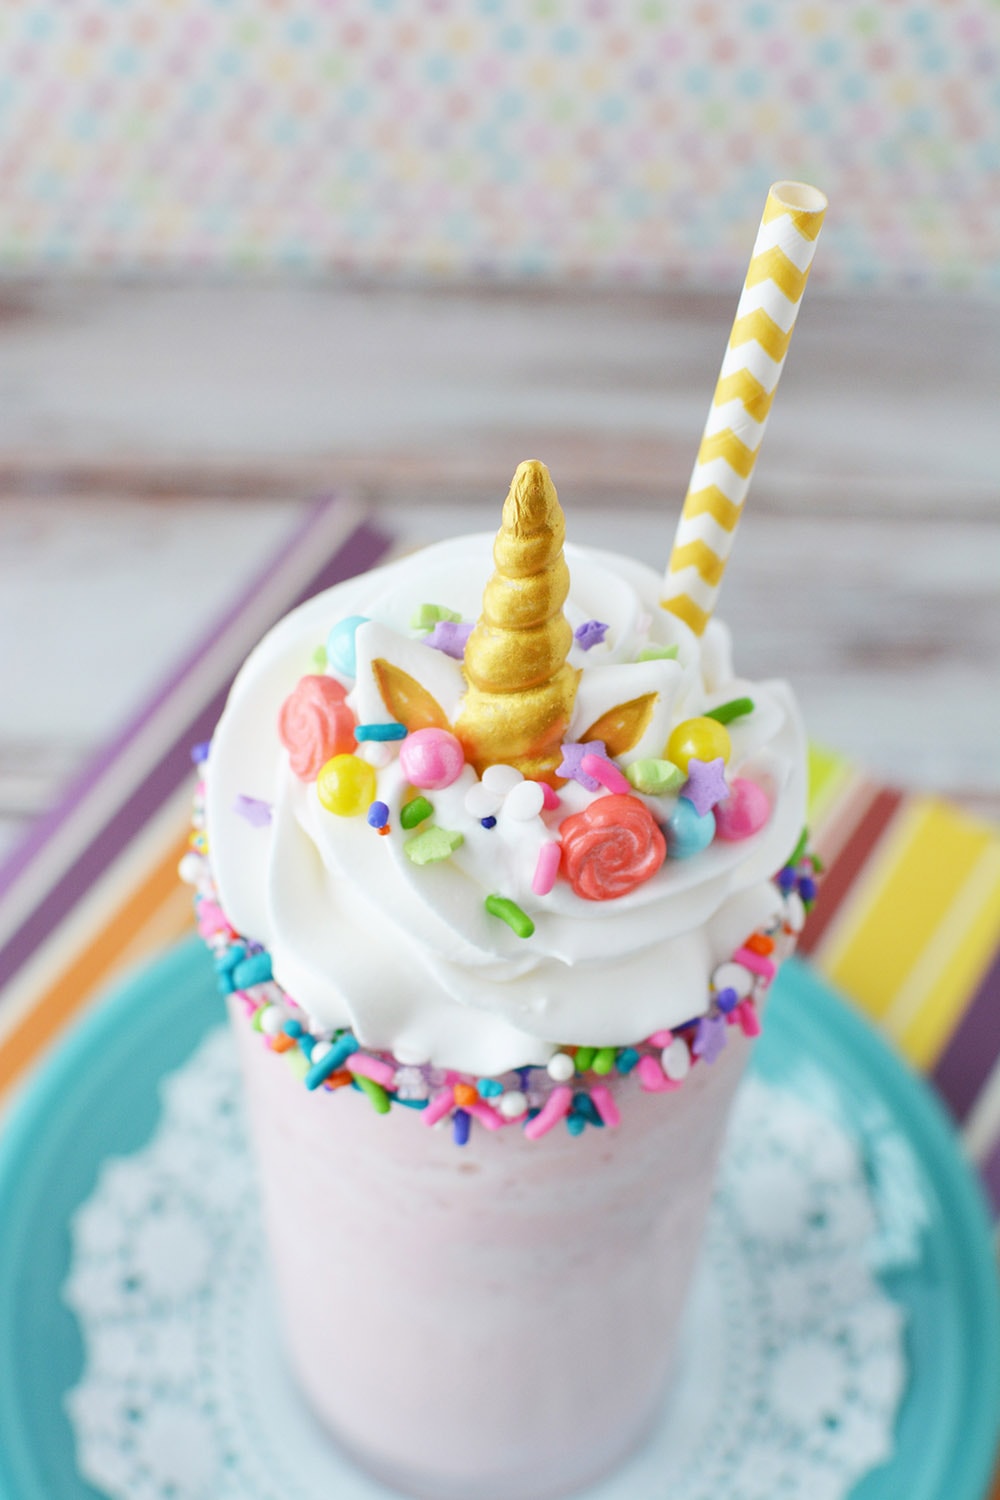 Cotton candy frappuccino with unicorn horn candy and other toppings to look like a unicorn frappuccino.